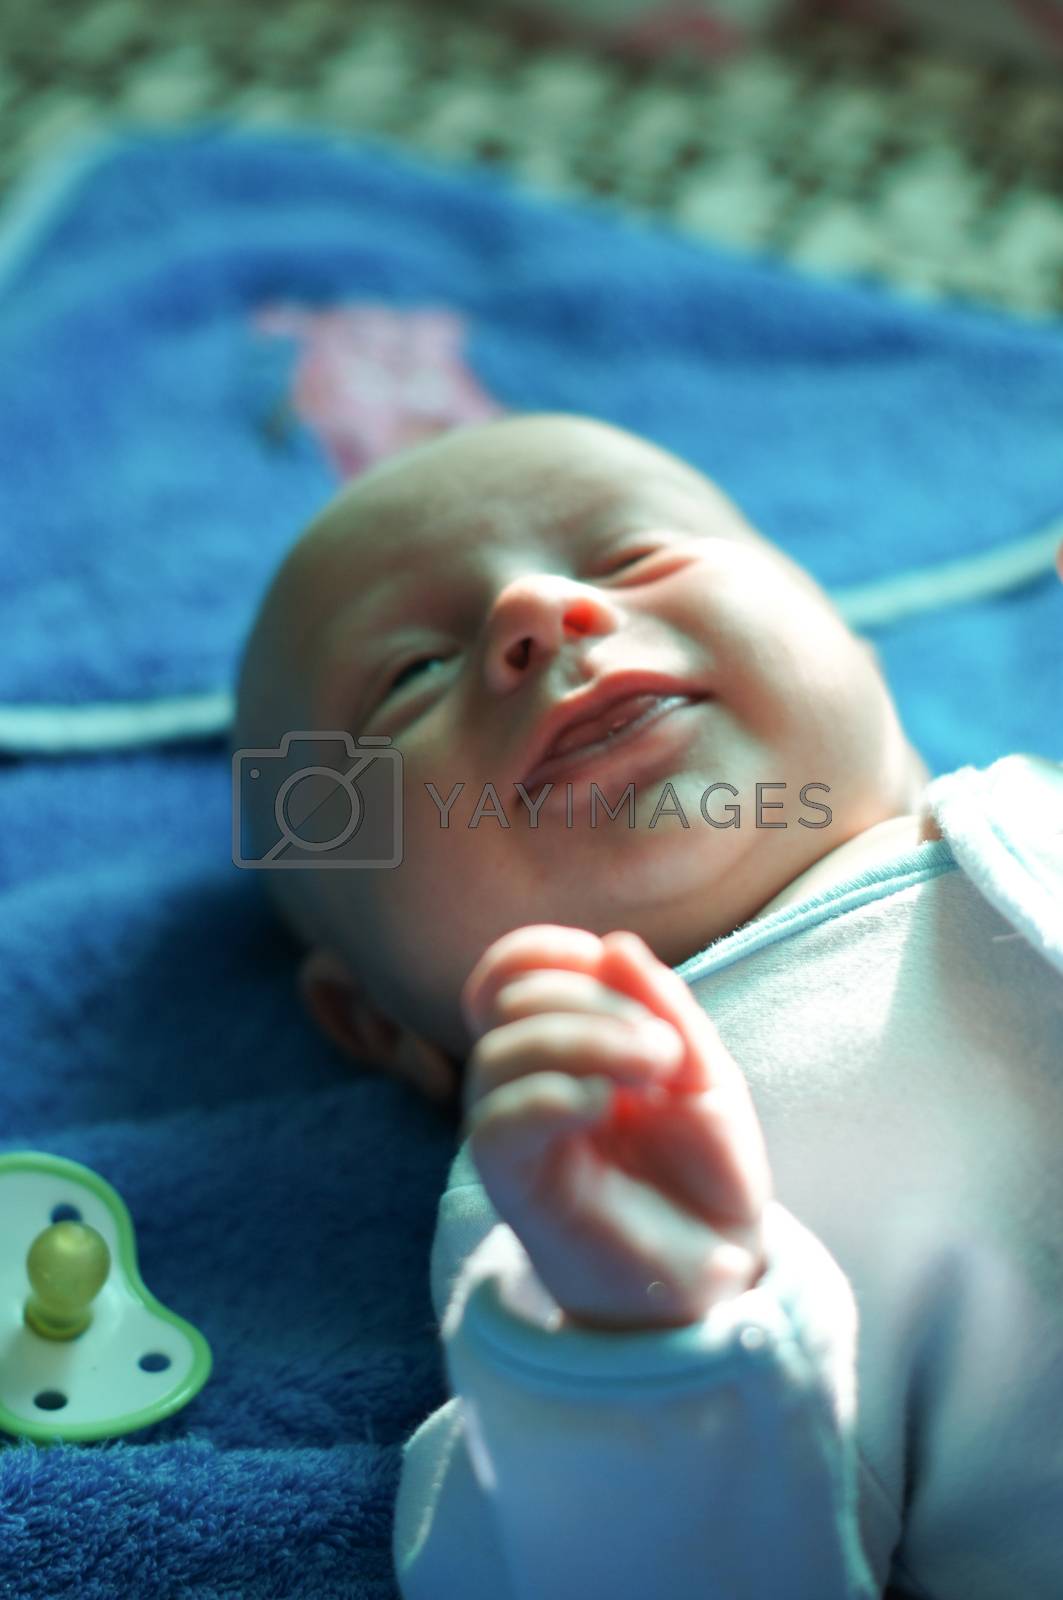 Royalty free image of A charming little baby by Viktoha